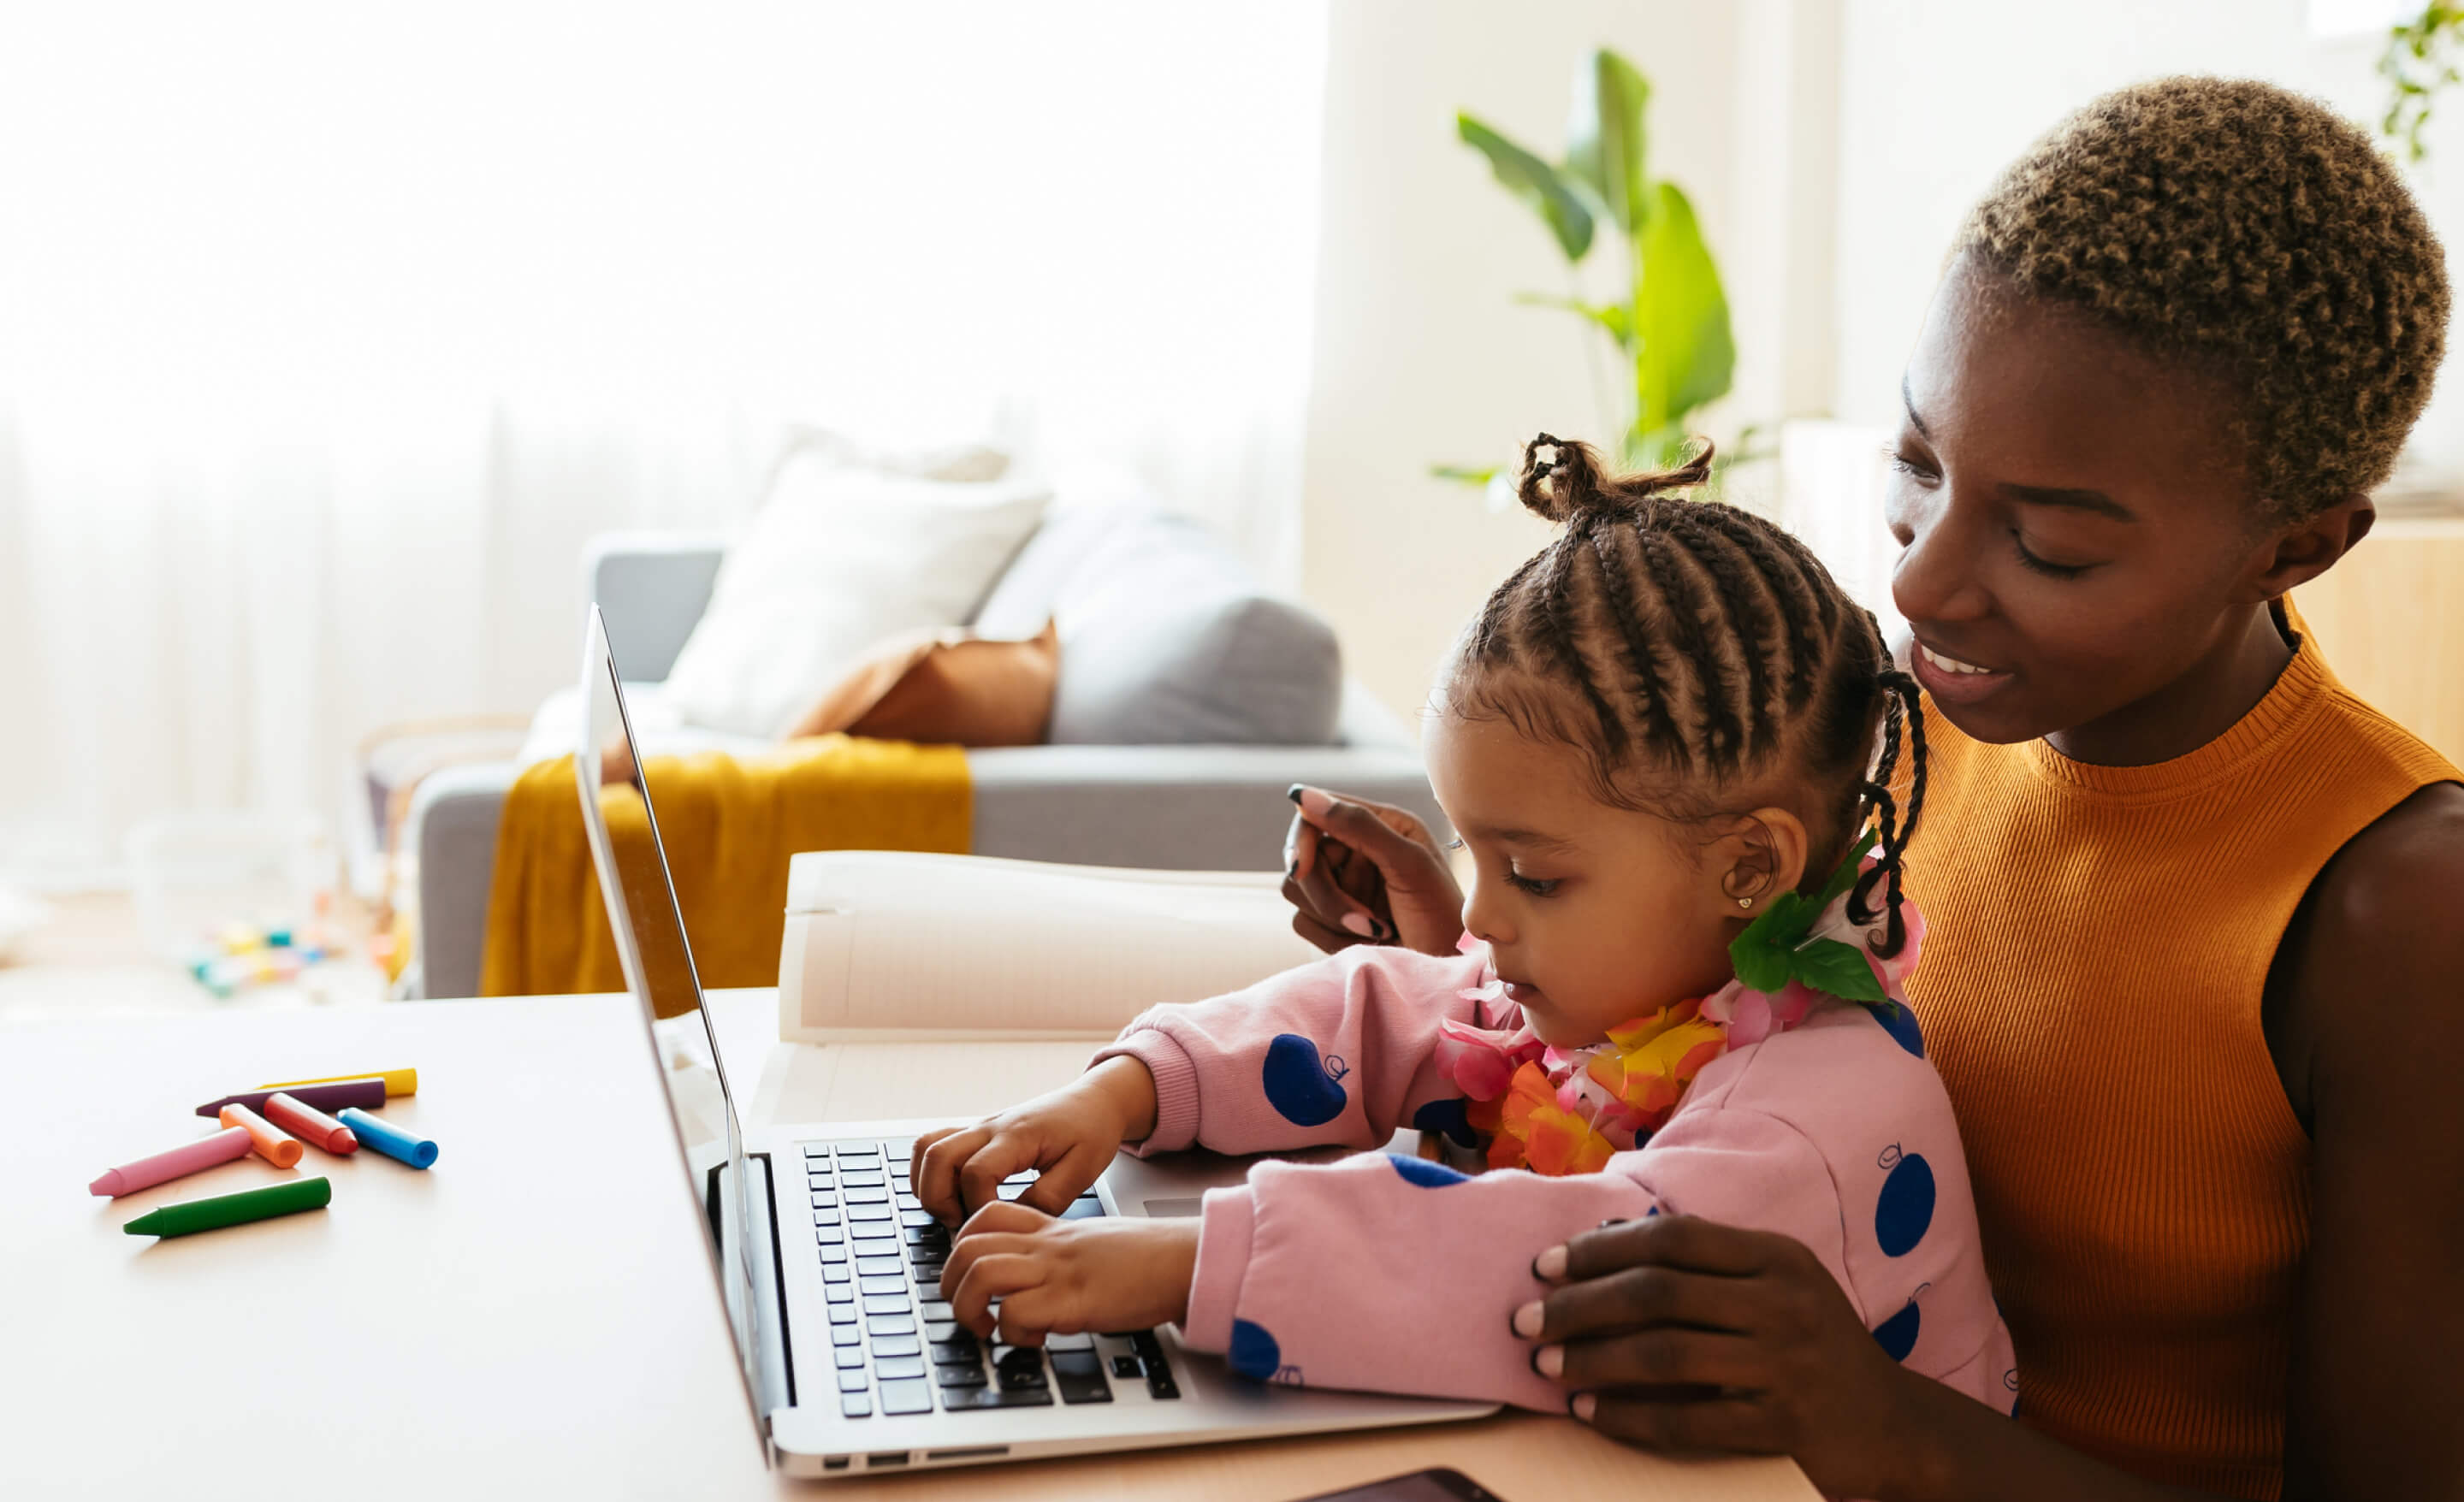 Short-haired black woman smiles as a young girl in her lap types on a laptop.